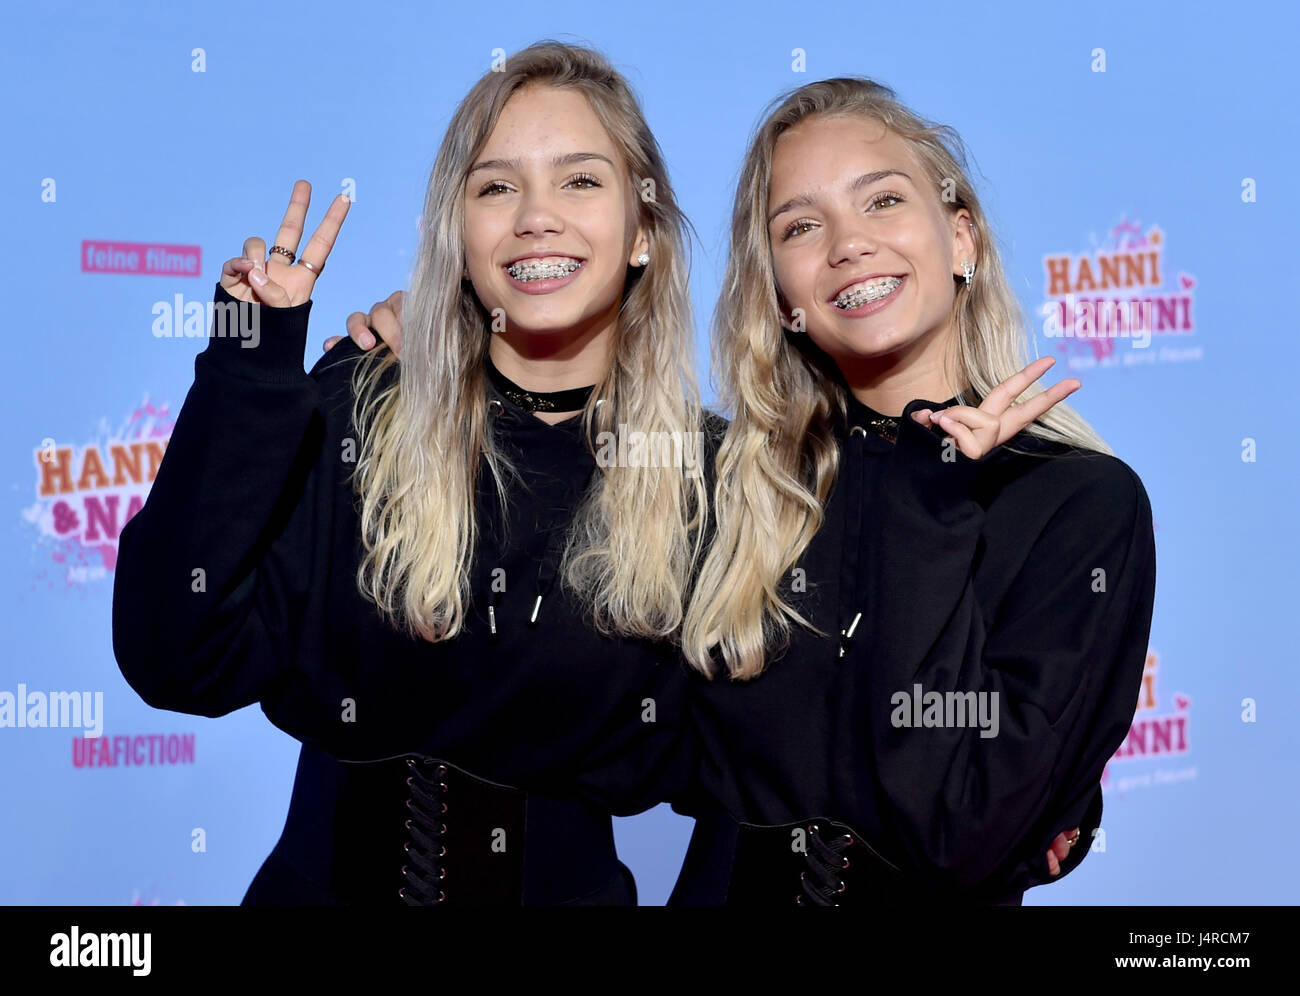 Berlin, Germany. 14th May, 2017. The web video producers Lisa and Lena  arrive at the world premiere of 'Hanni & Nanni - Mehr als beste Freunde'  (lit. 'More than best friends') at